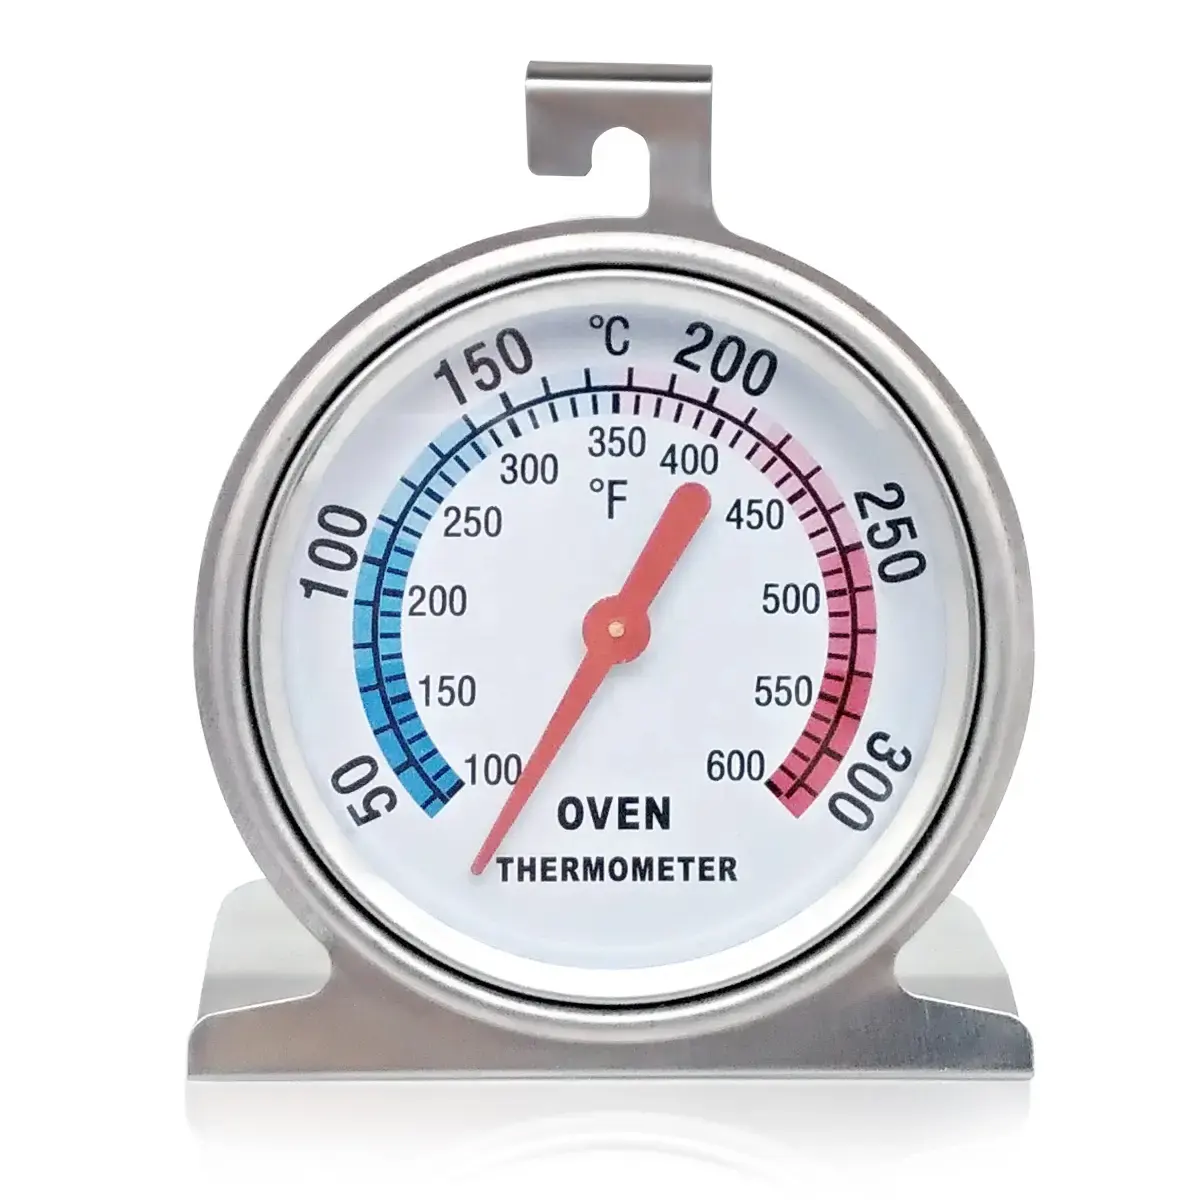 Oven thermometer Easy-Read Face Stainless Steel Instant Read Kitchen Cooking oven Thermometer